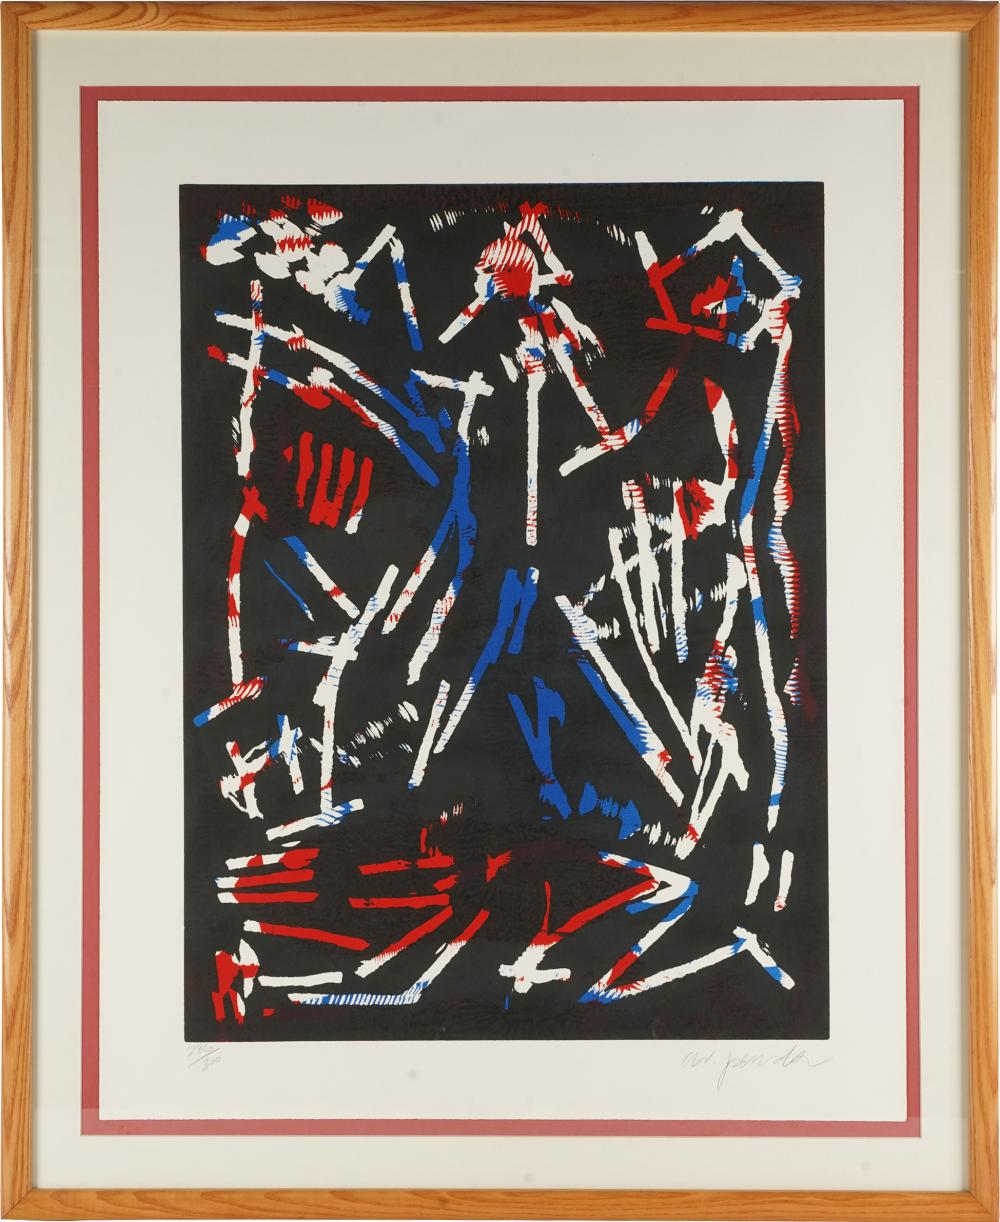 A.R. (RALF WINKLER) PENCK: ABSTRACTpencil-signed